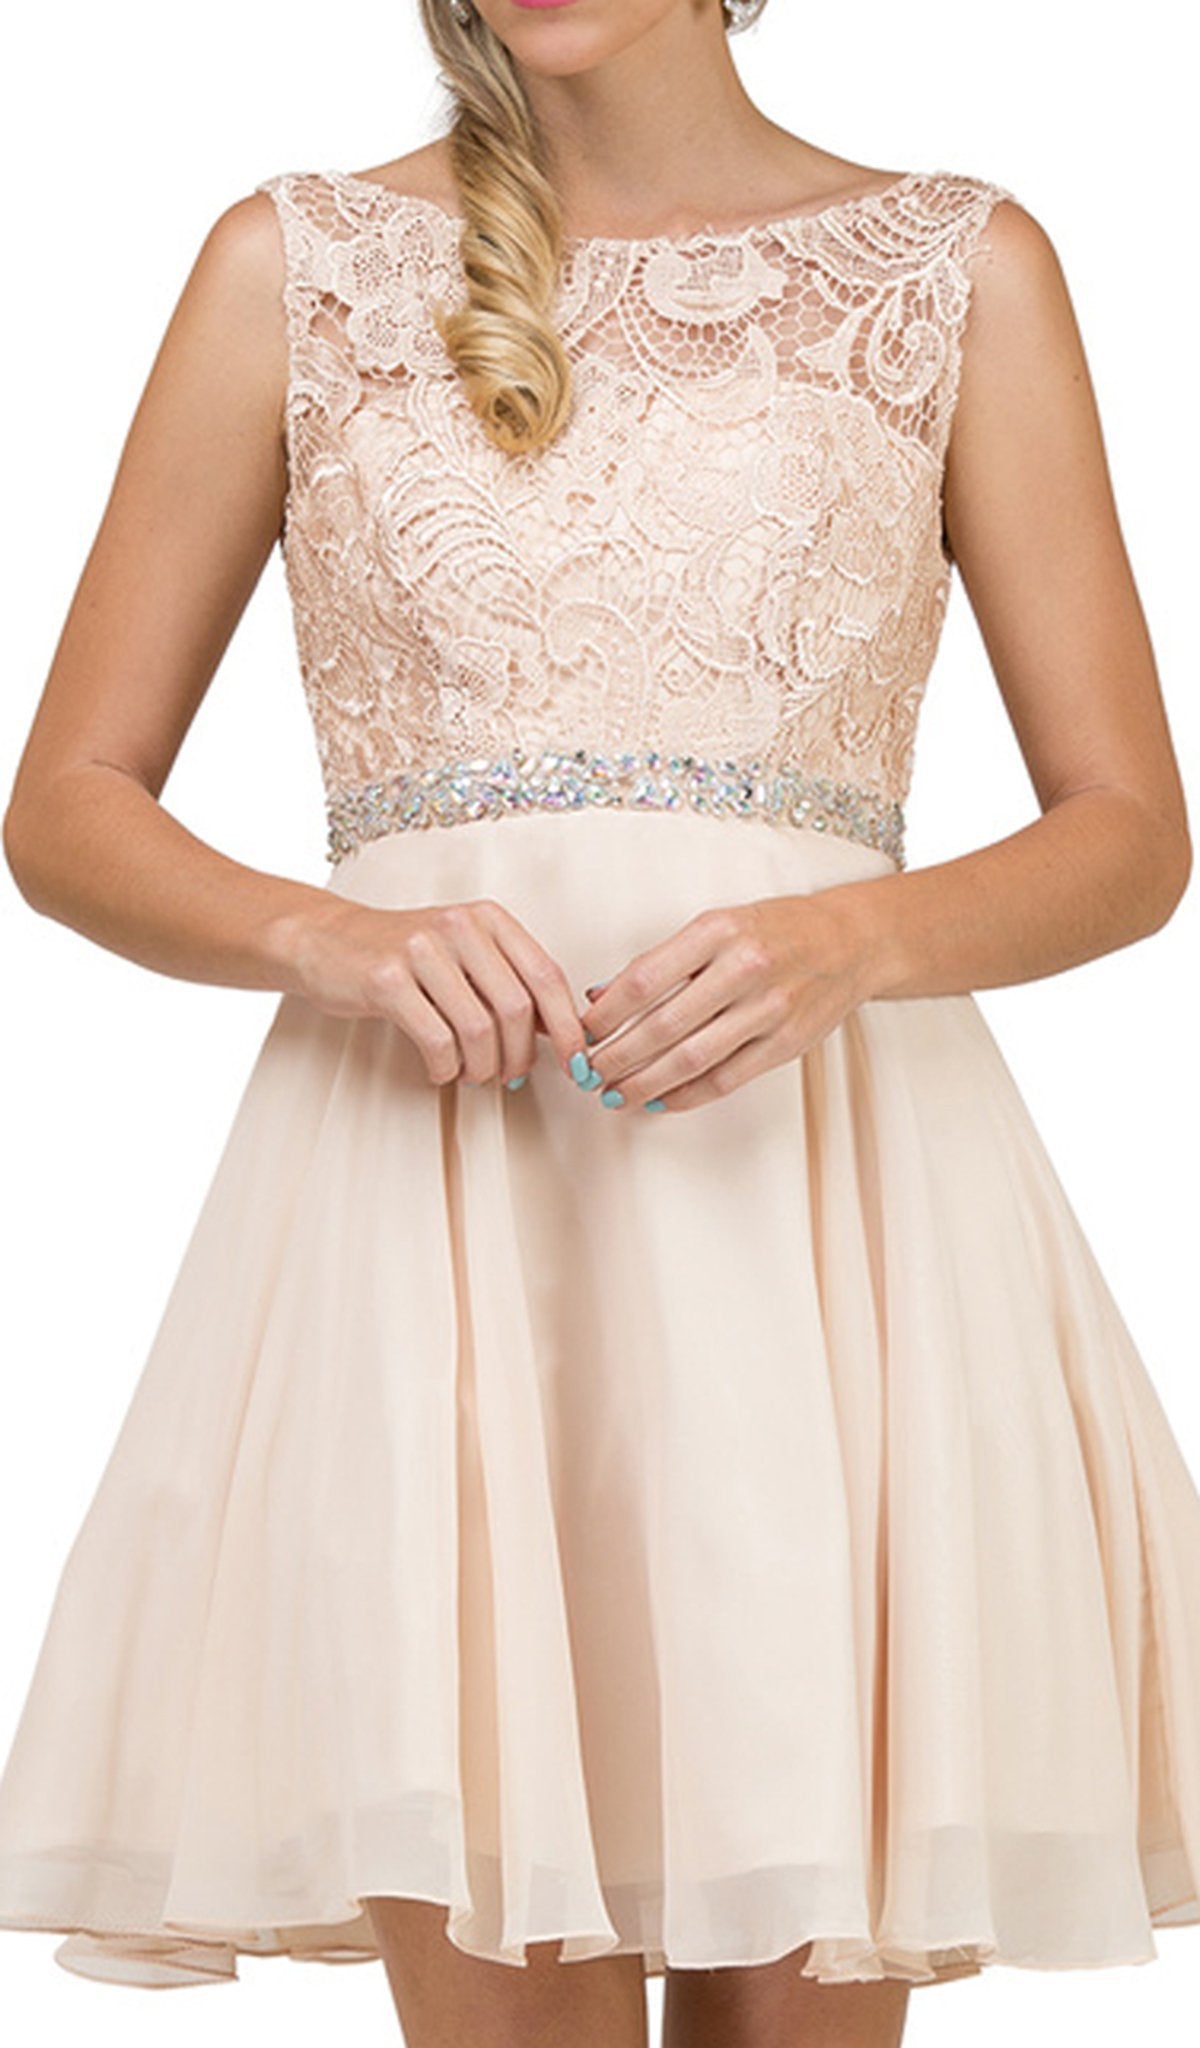 Dancing Queen - 9659 Illusion Lace Bodice Cocktail Dress in Nude